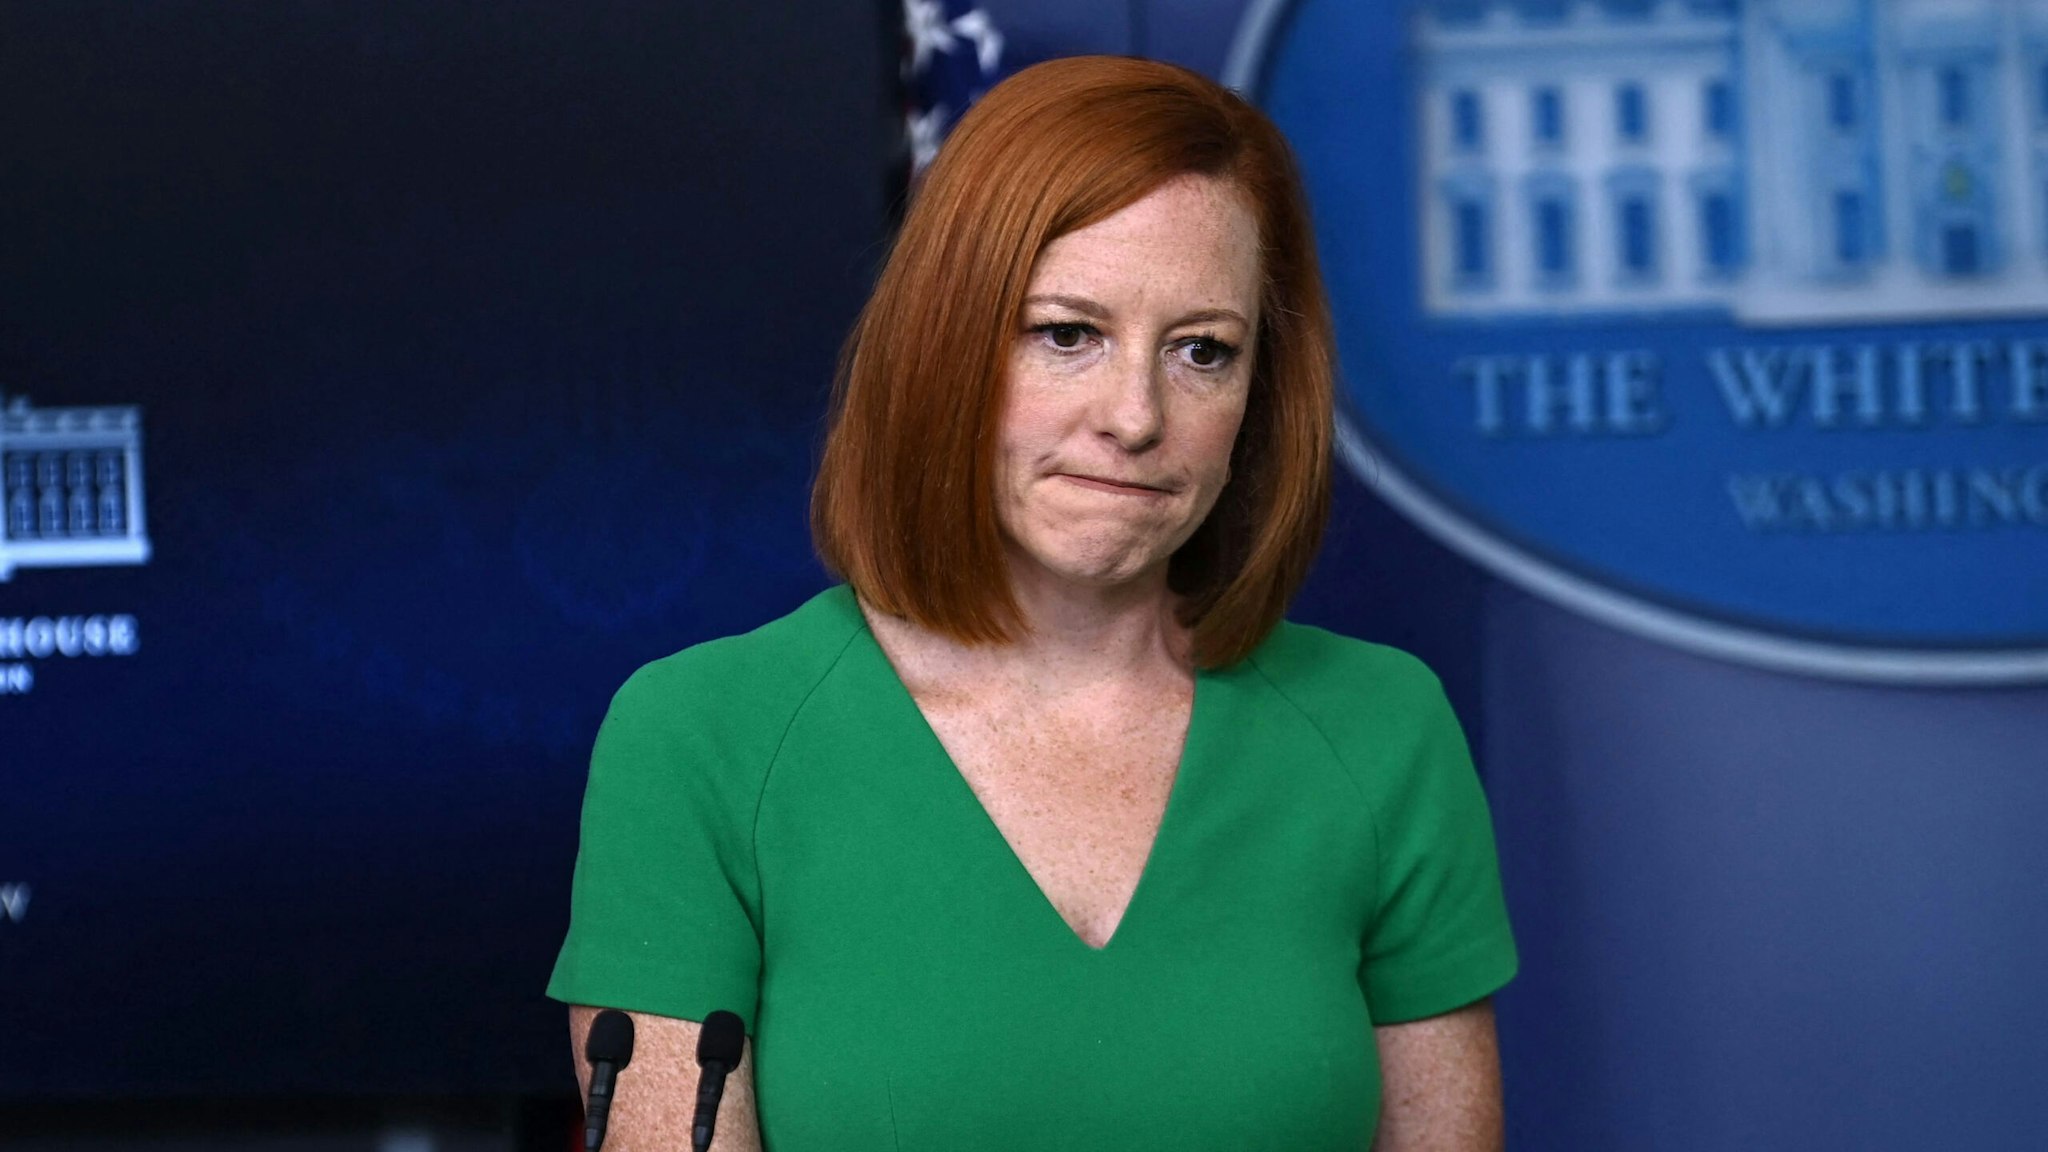 White House Press Secretary Jen Psaki speaks during the daily press briefing on July 16, 2021, in the Brady Briefing Room of the White House in Washington, DC.